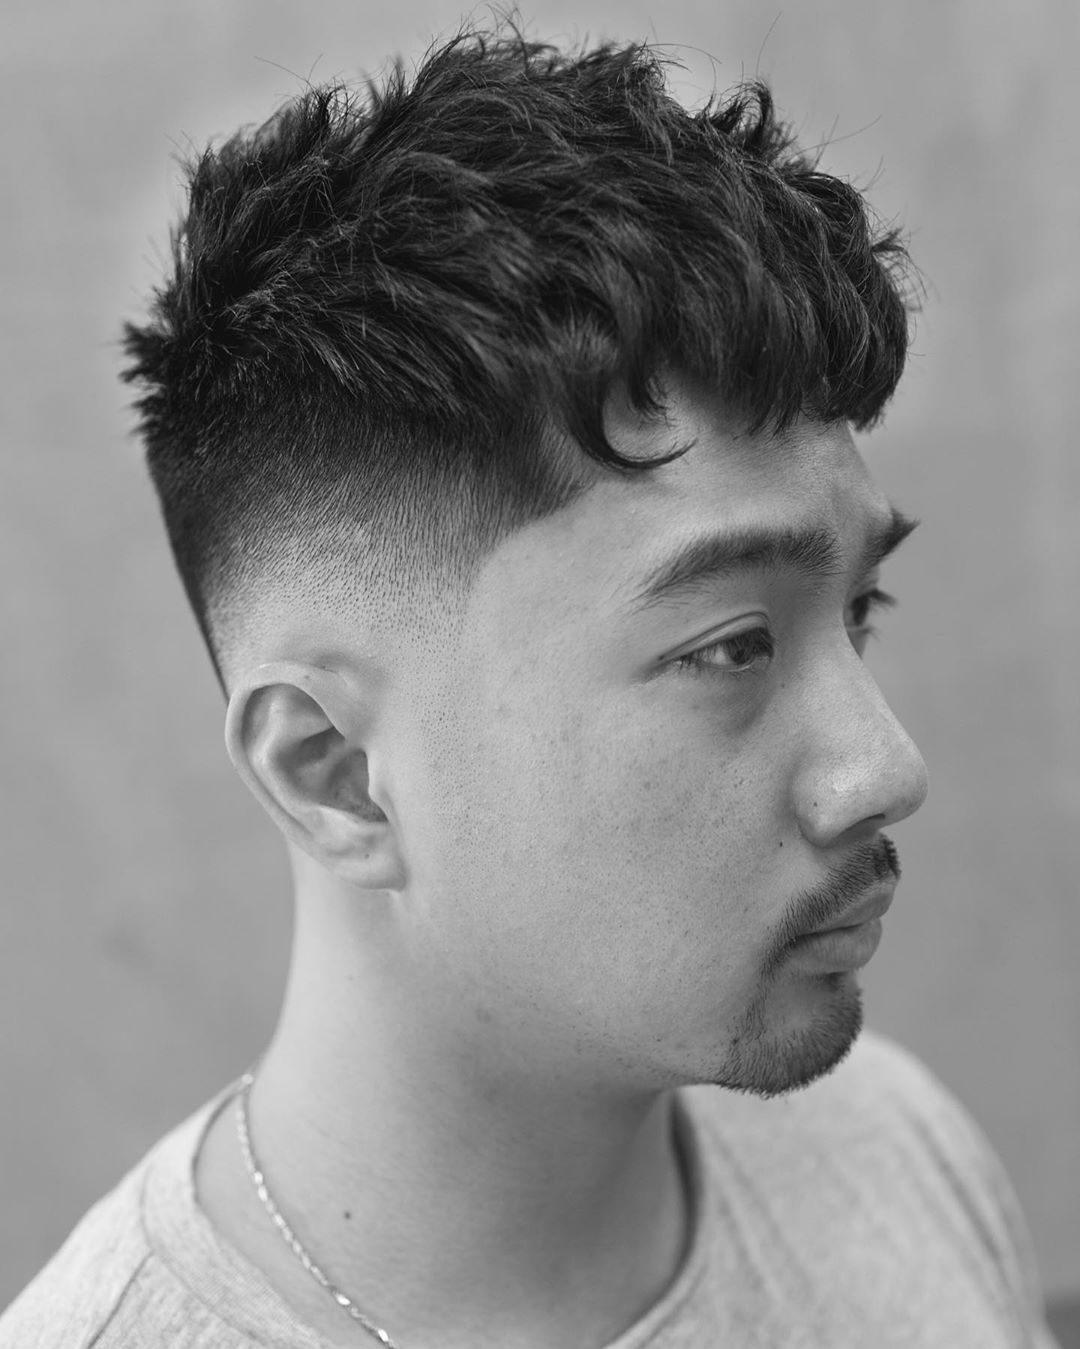 The 20 Best Asian Men's Hairstyles for 20   The Modest Man